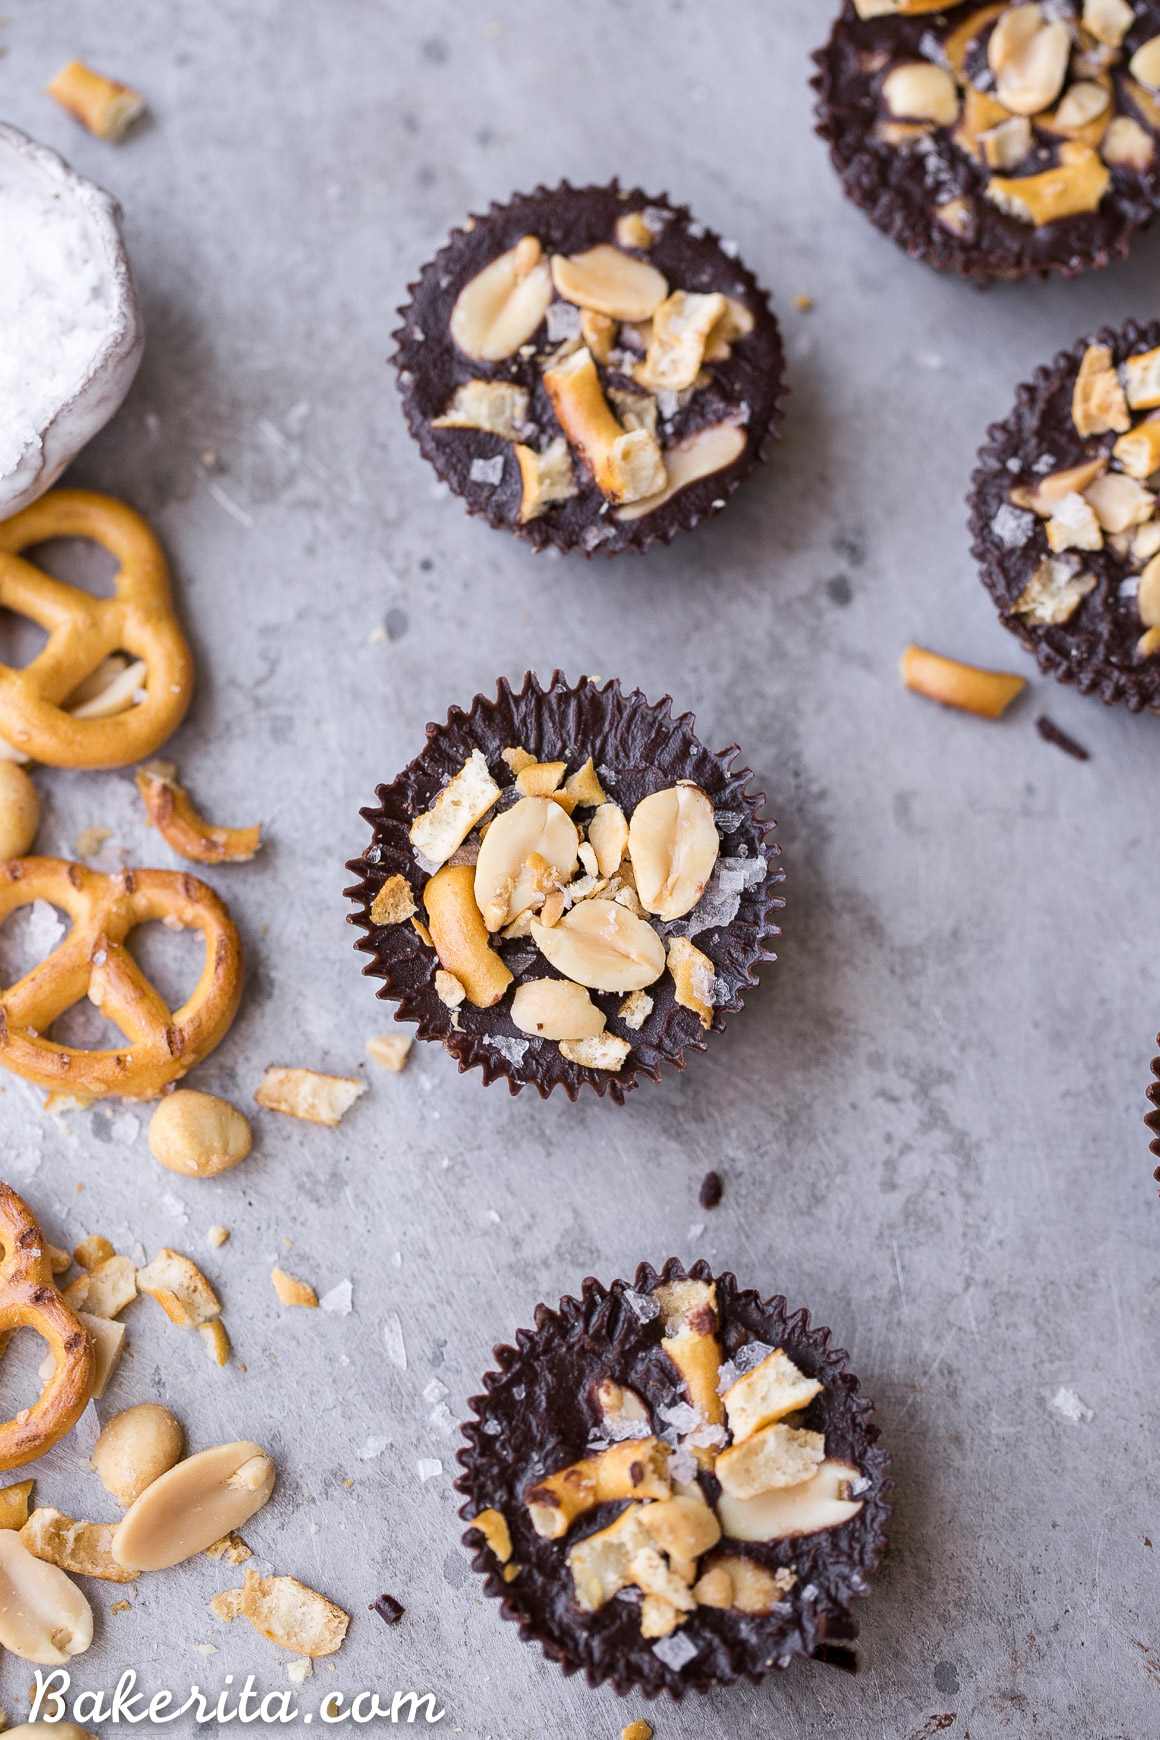 These Chocolate Pretzel Peanut Butter Cups are inspired by the Take 5 candy bar, but made with way more wholesome ingredients! These gluten-free, refined sugar-free and vegan candy cups are filled with peanut butter caramel, with pretzels and peanuts for crunch.